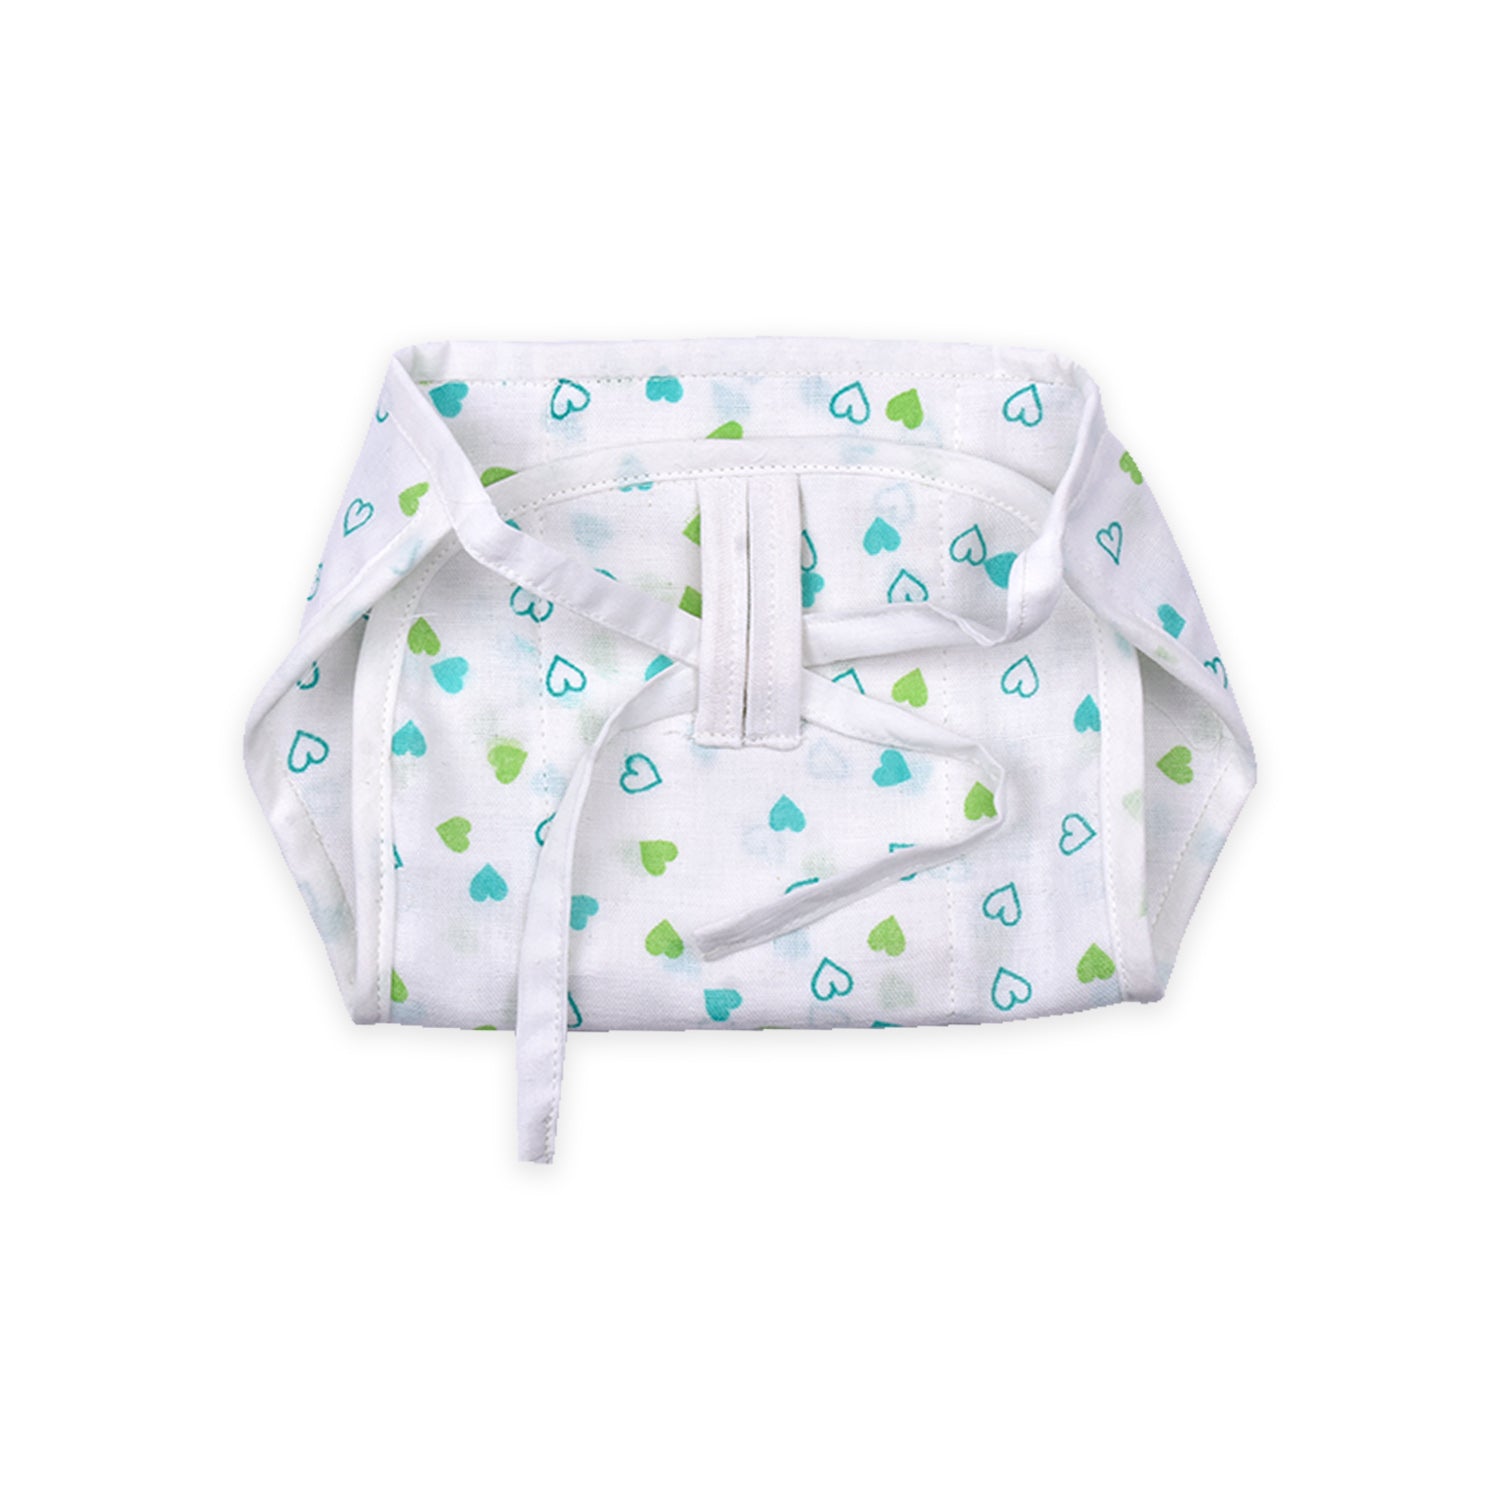 Baby Organic Cotton Printed Muslin Nappies Pack of - 3 Mix